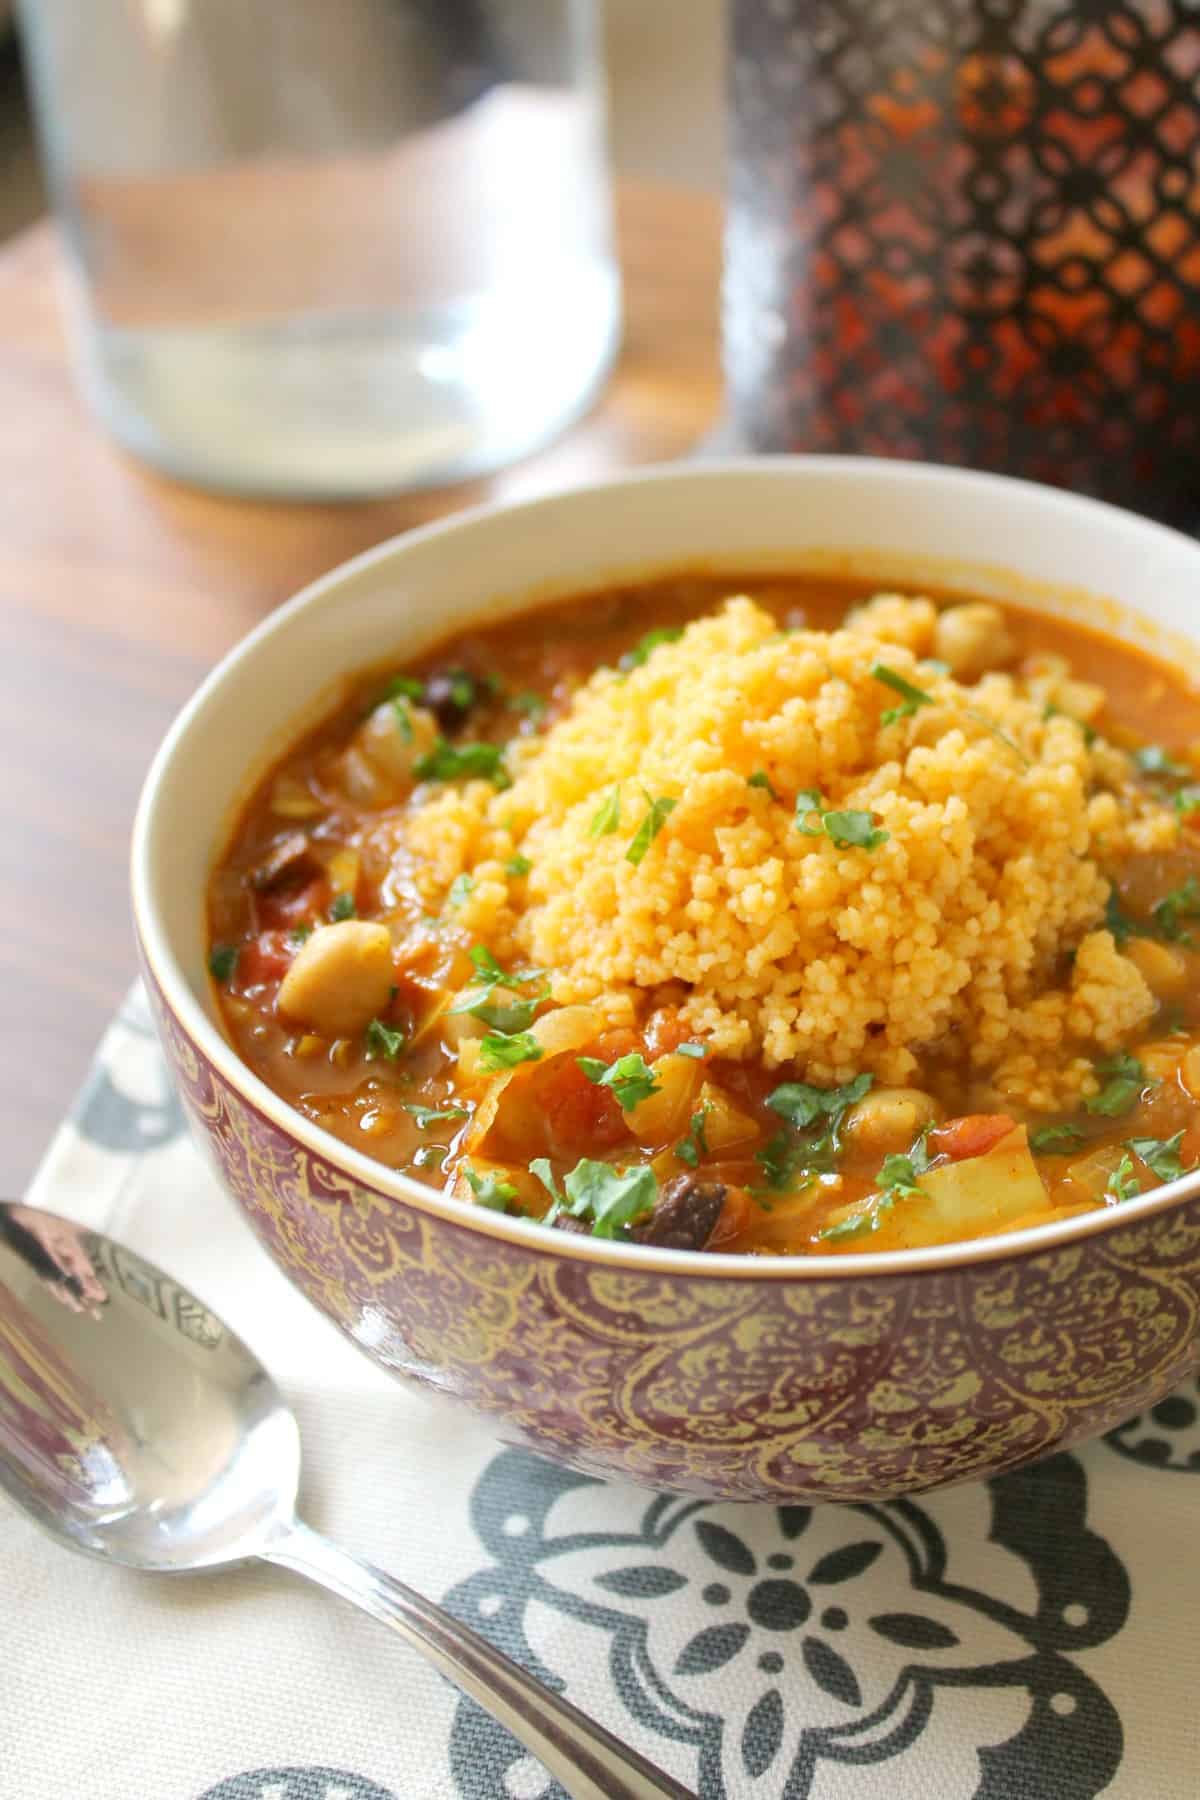 Moroccan-Spiced Vegetable Soup via The Kitchen Prep. An easy and flavorful meal for a cold day!